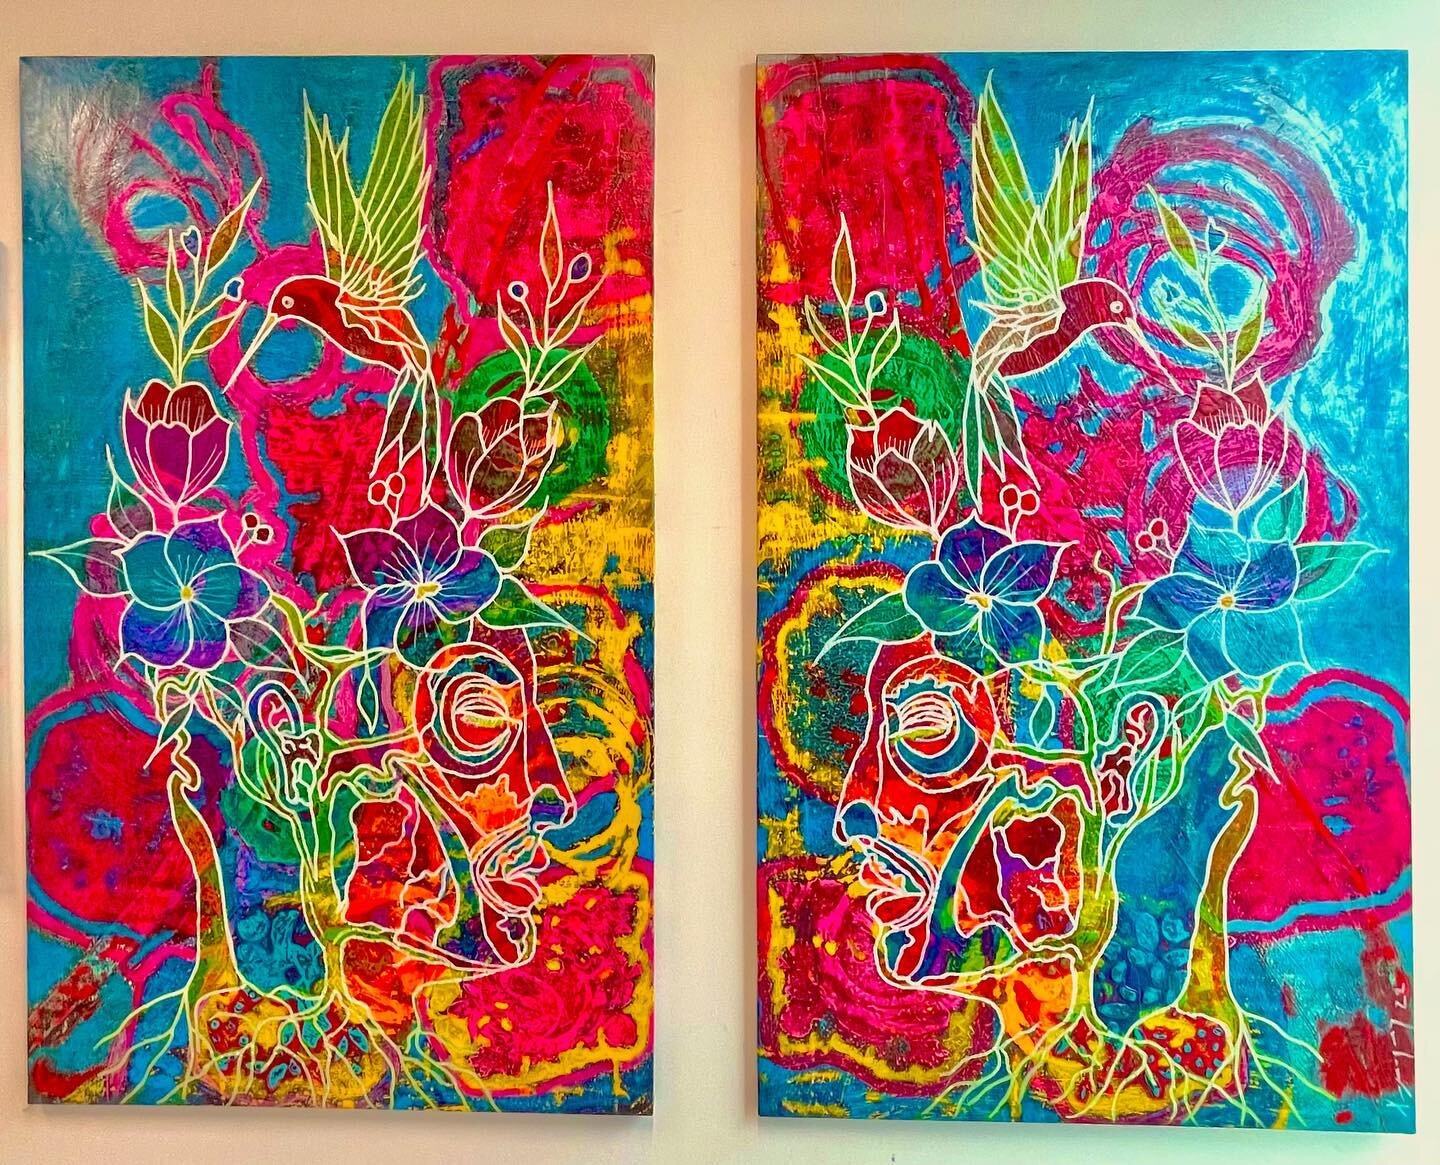 Finishing the last piece 47*78 inches each piece (diptych) The effects of time on Memory &ldquo;Human Animals&rdquo; Being Dialogues, acrylic on canvas.  At @latinoartsinc  From Friday September 2, Exhibit reception Friday September 9,  until October